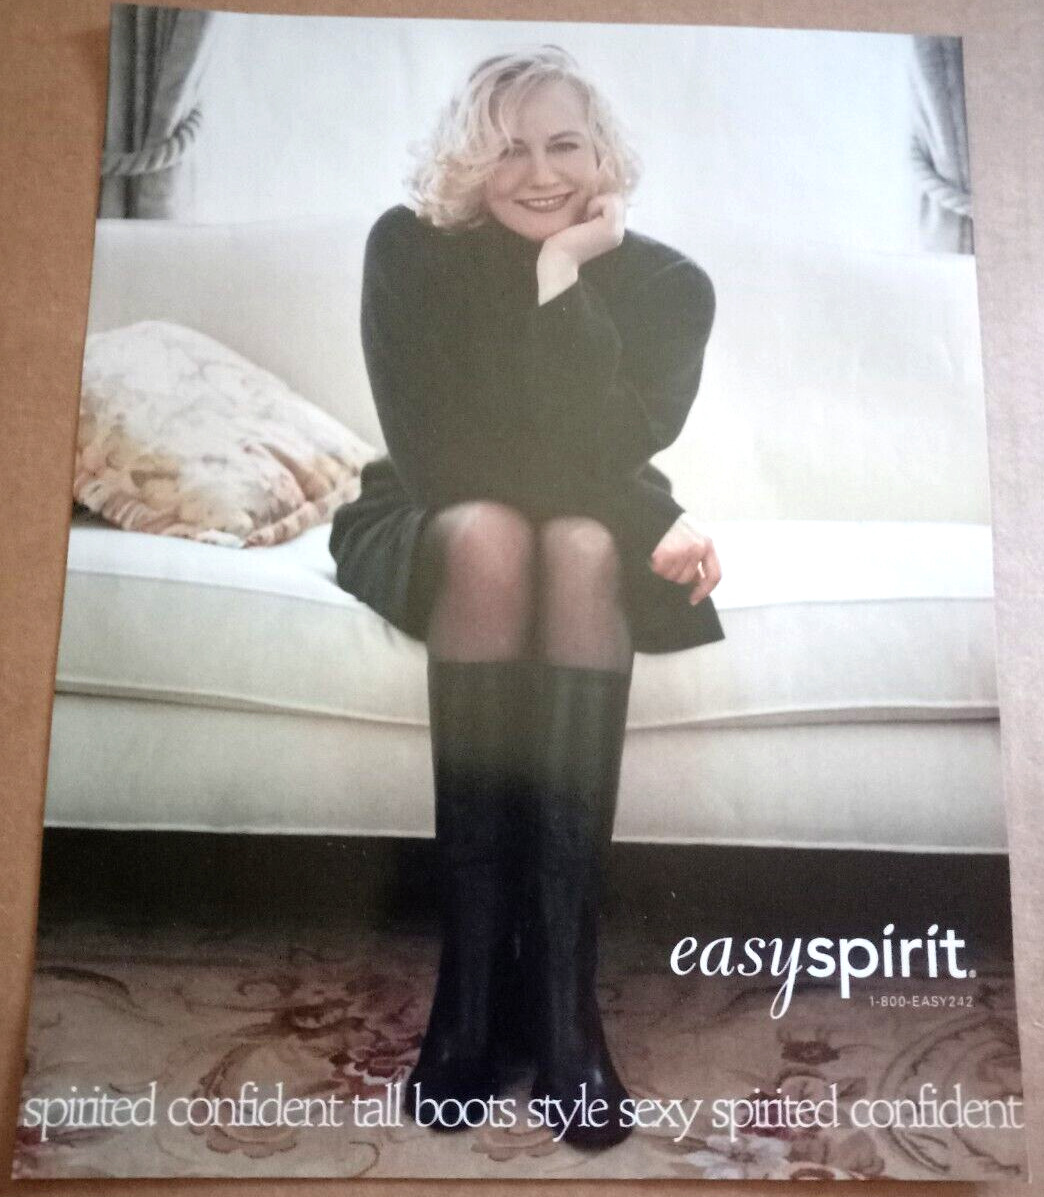 2001 print ad page - beautiful CYBILL SHEPHERD easy spirit shoes Advertising